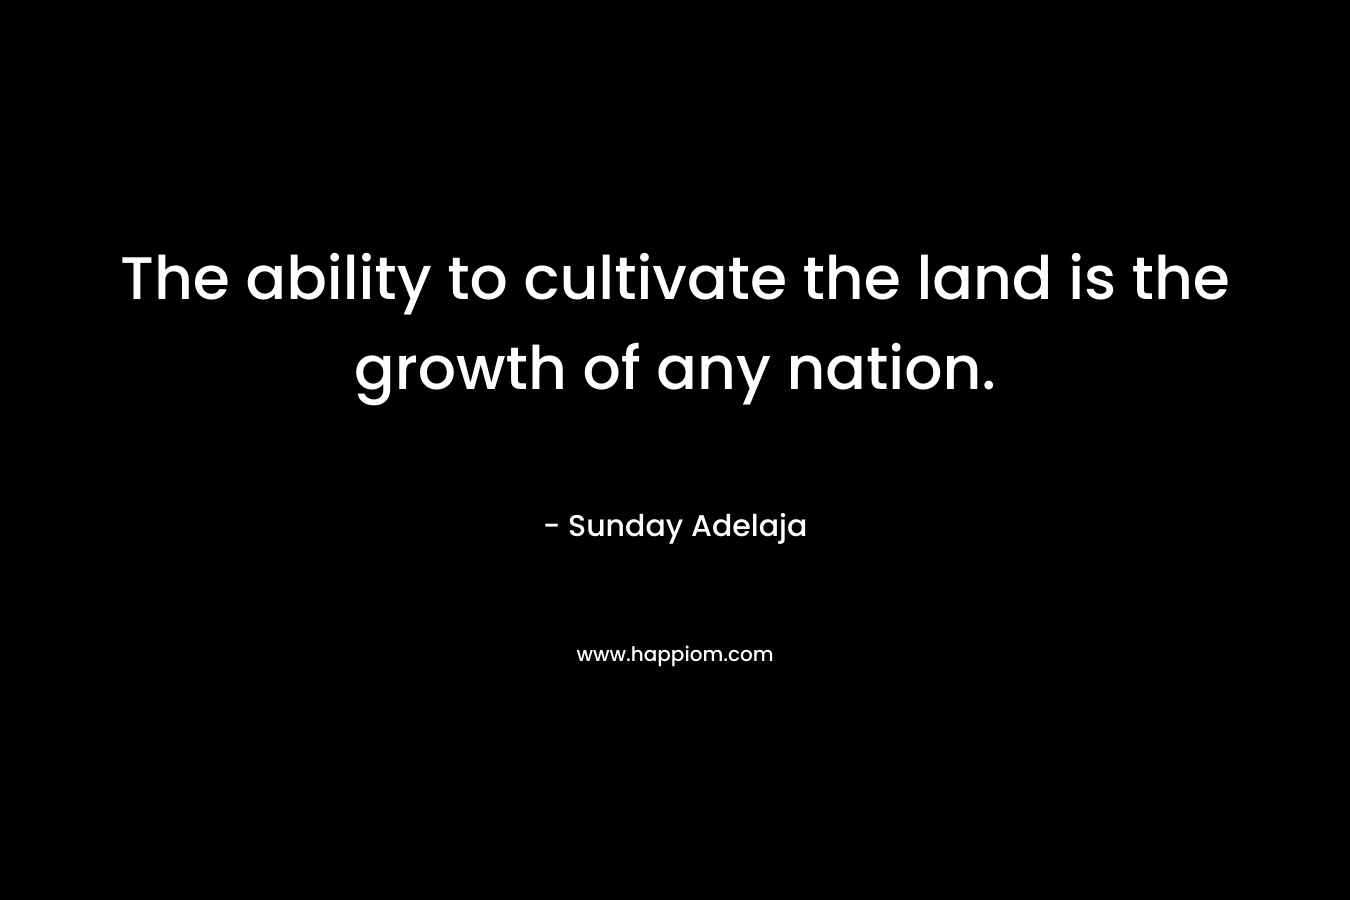 The ability to cultivate the land is the growth of any nation.